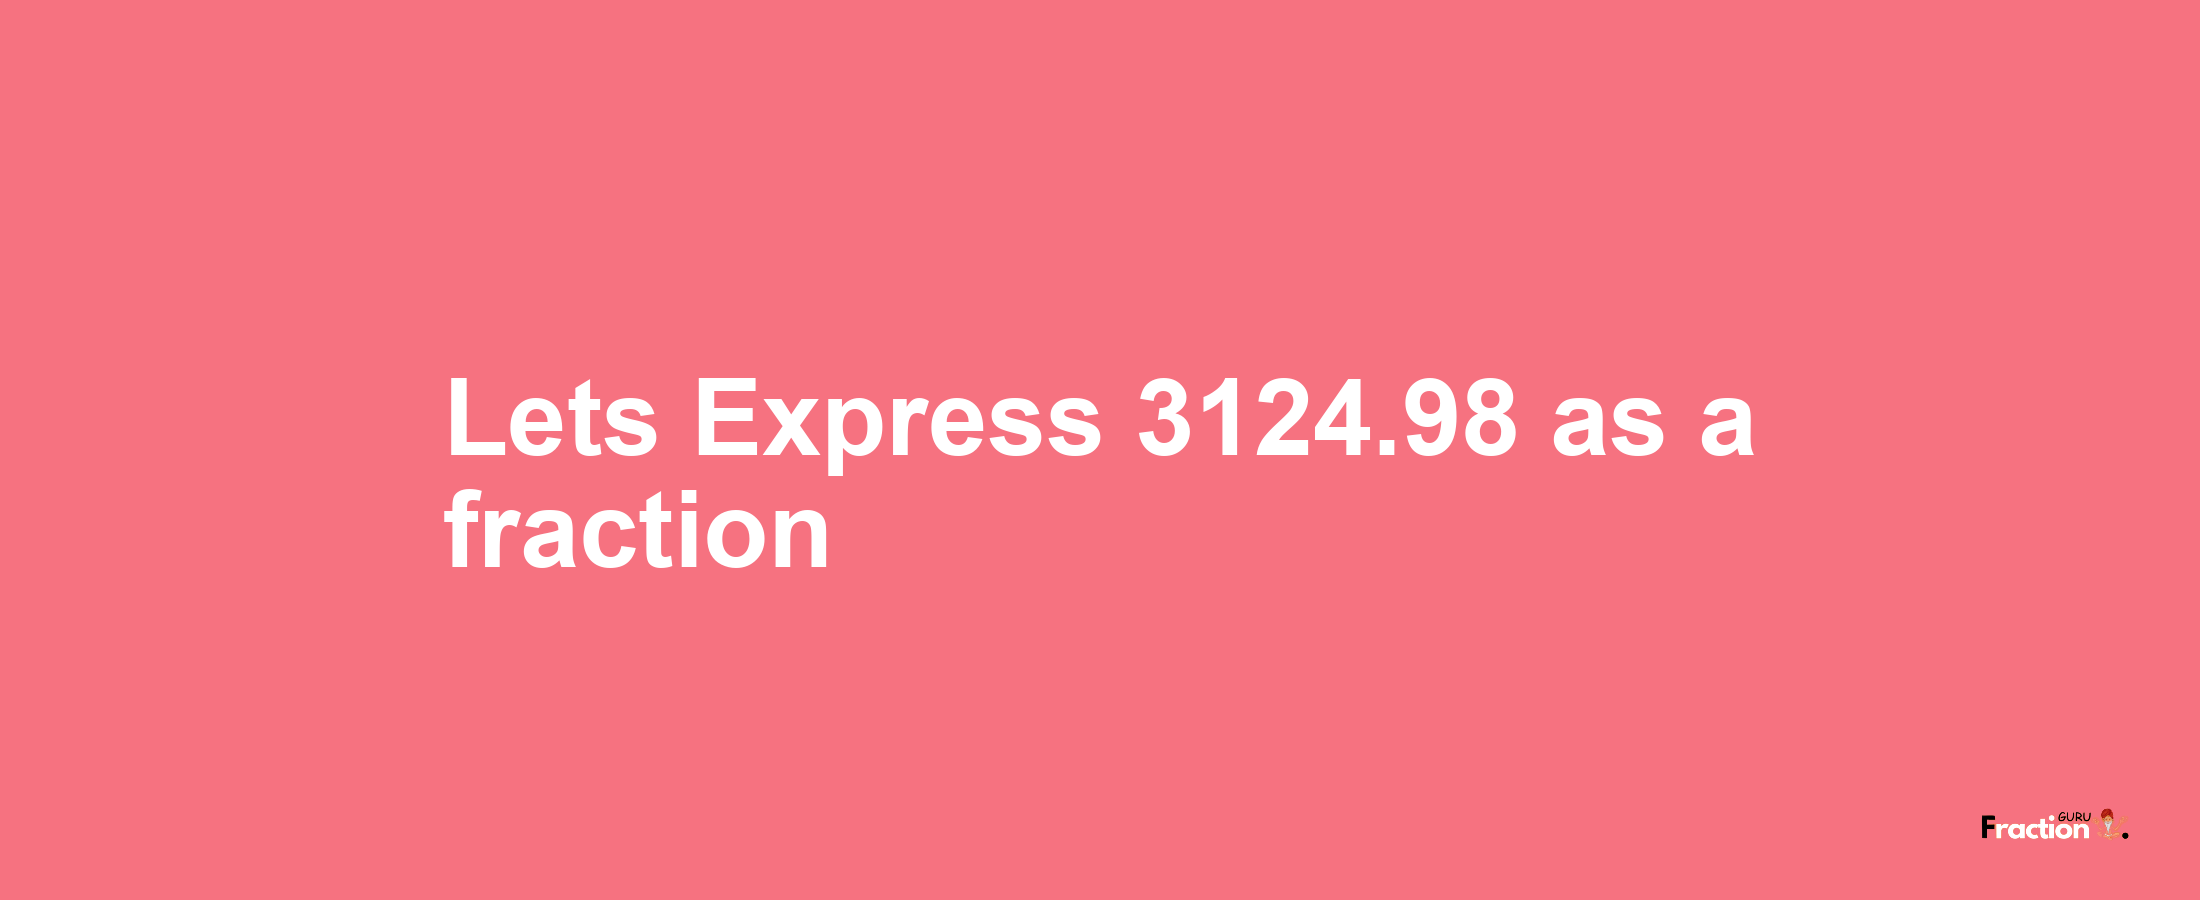 Lets Express 3124.98 as afraction